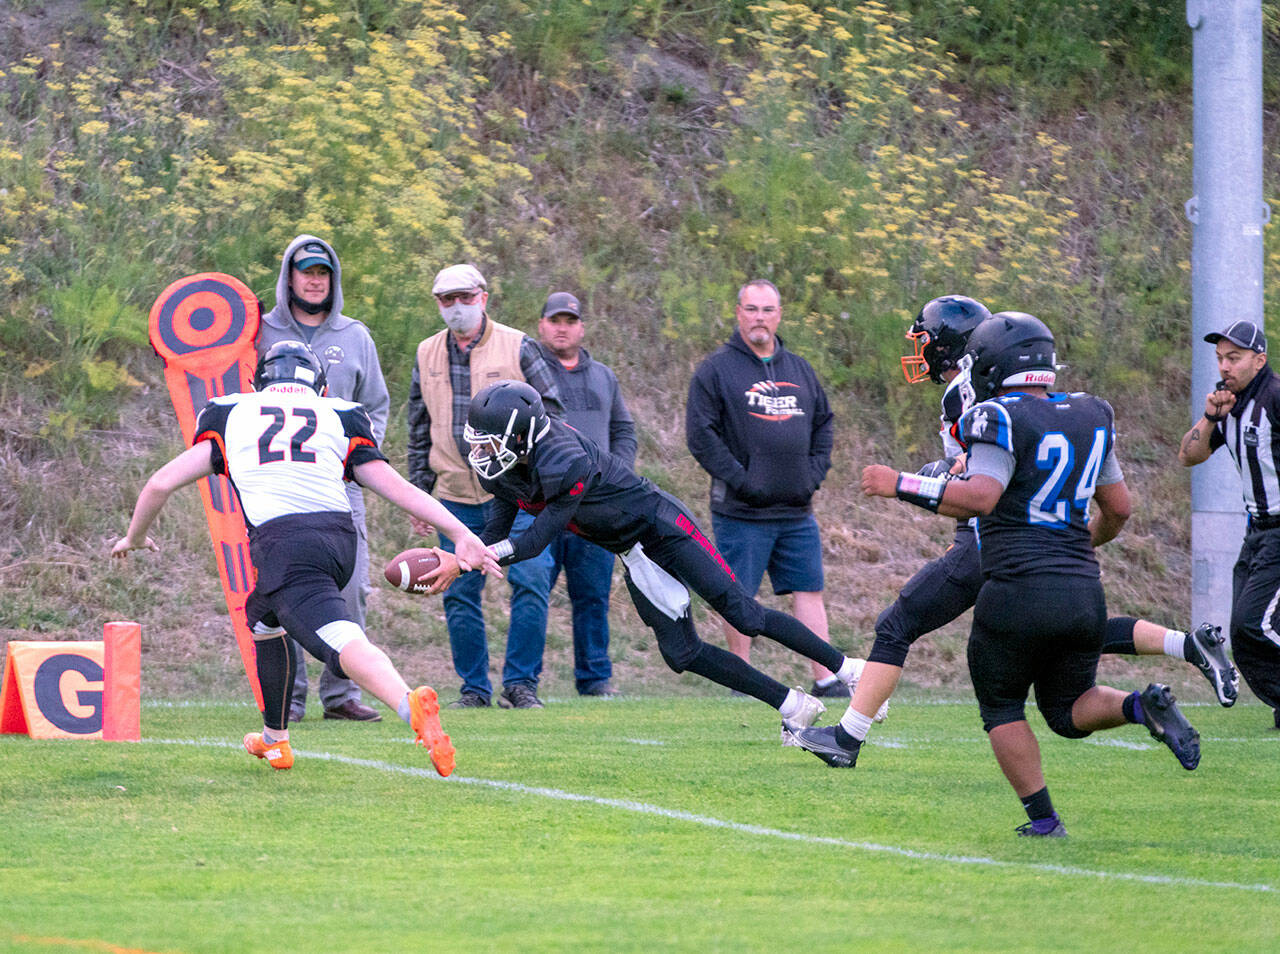 Steve Mullensky/for Peninsula Daily News Granite Falls Tiger, Connor Wichman, (11) can only watch as East Jefferson Rival, Cash Holmes, dives into the end zone for six points after a 10 yard dash from scrimmage during a Friday night game in Port Townsend’s Memorial Field.